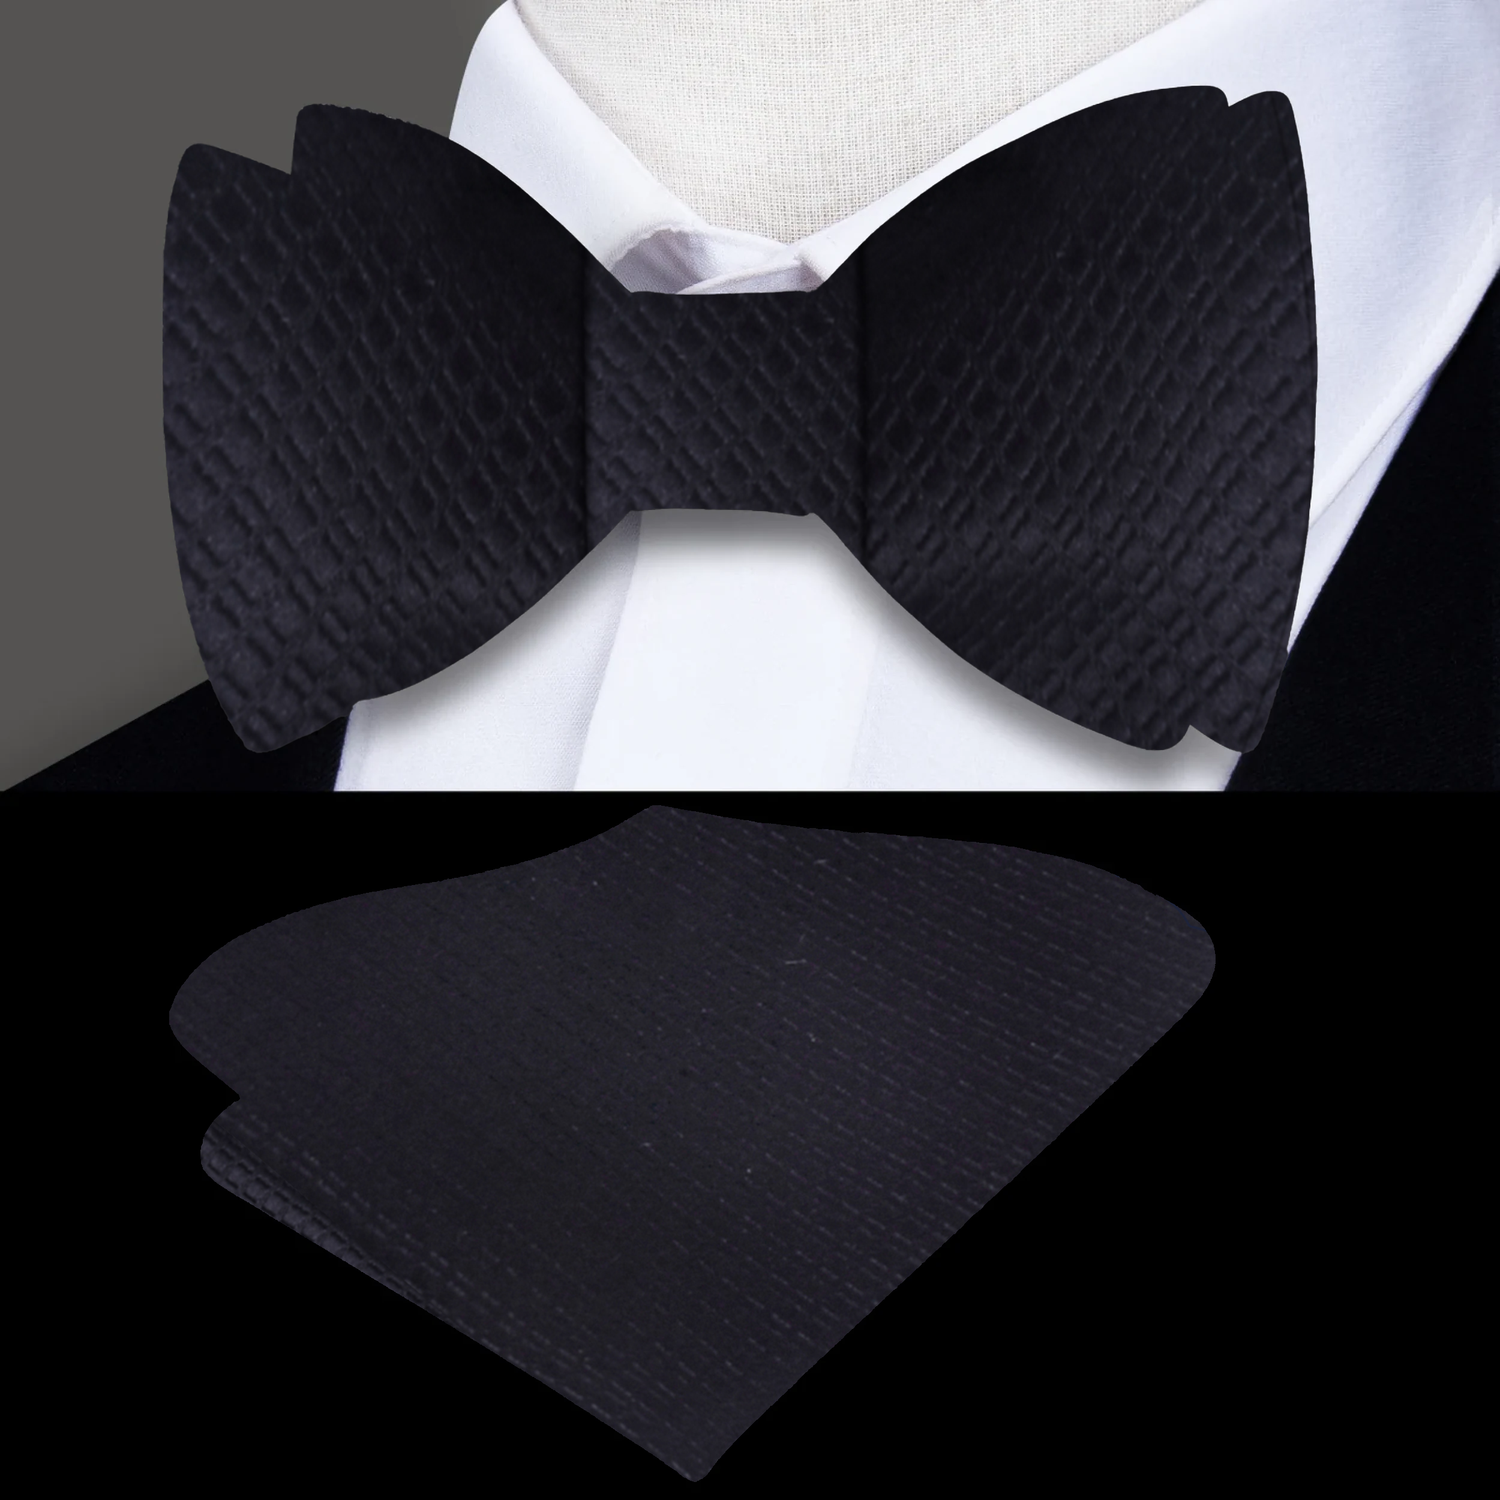 Main: A Solid Black With Small Check Texture Pattern Silk Self Tie Bow Tie With Matching Pocket Square